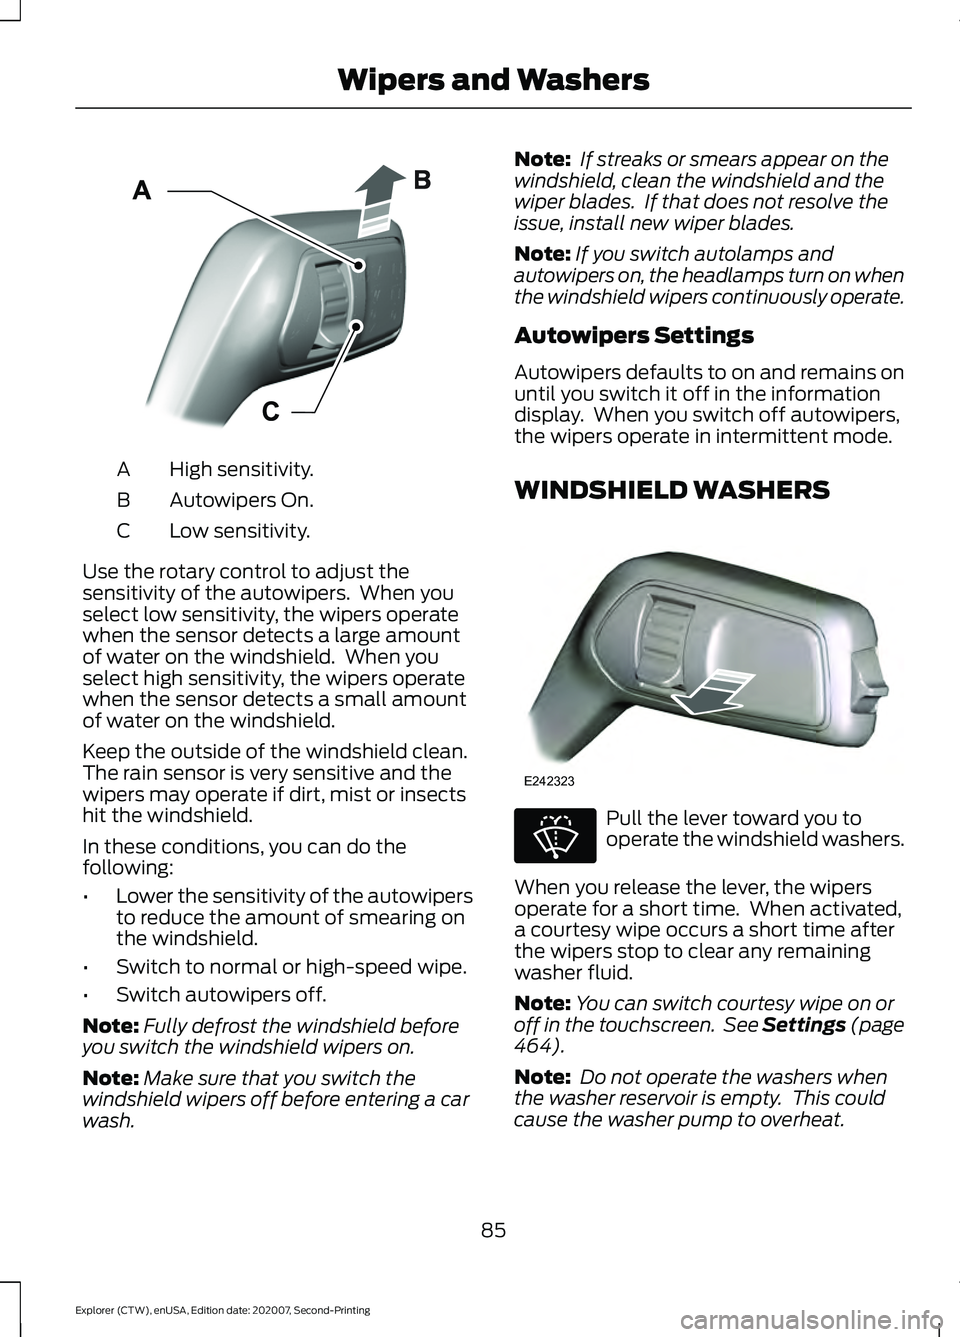 FORD EXPLORER 2021  Owners Manual High sensitivity.
A
Autowipers On.
B
Low sensitivity.
C
Use the rotary control to adjust the
sensitivity of the autowipers.  When you
select low sensitivity, the wipers operate
when the sensor detects